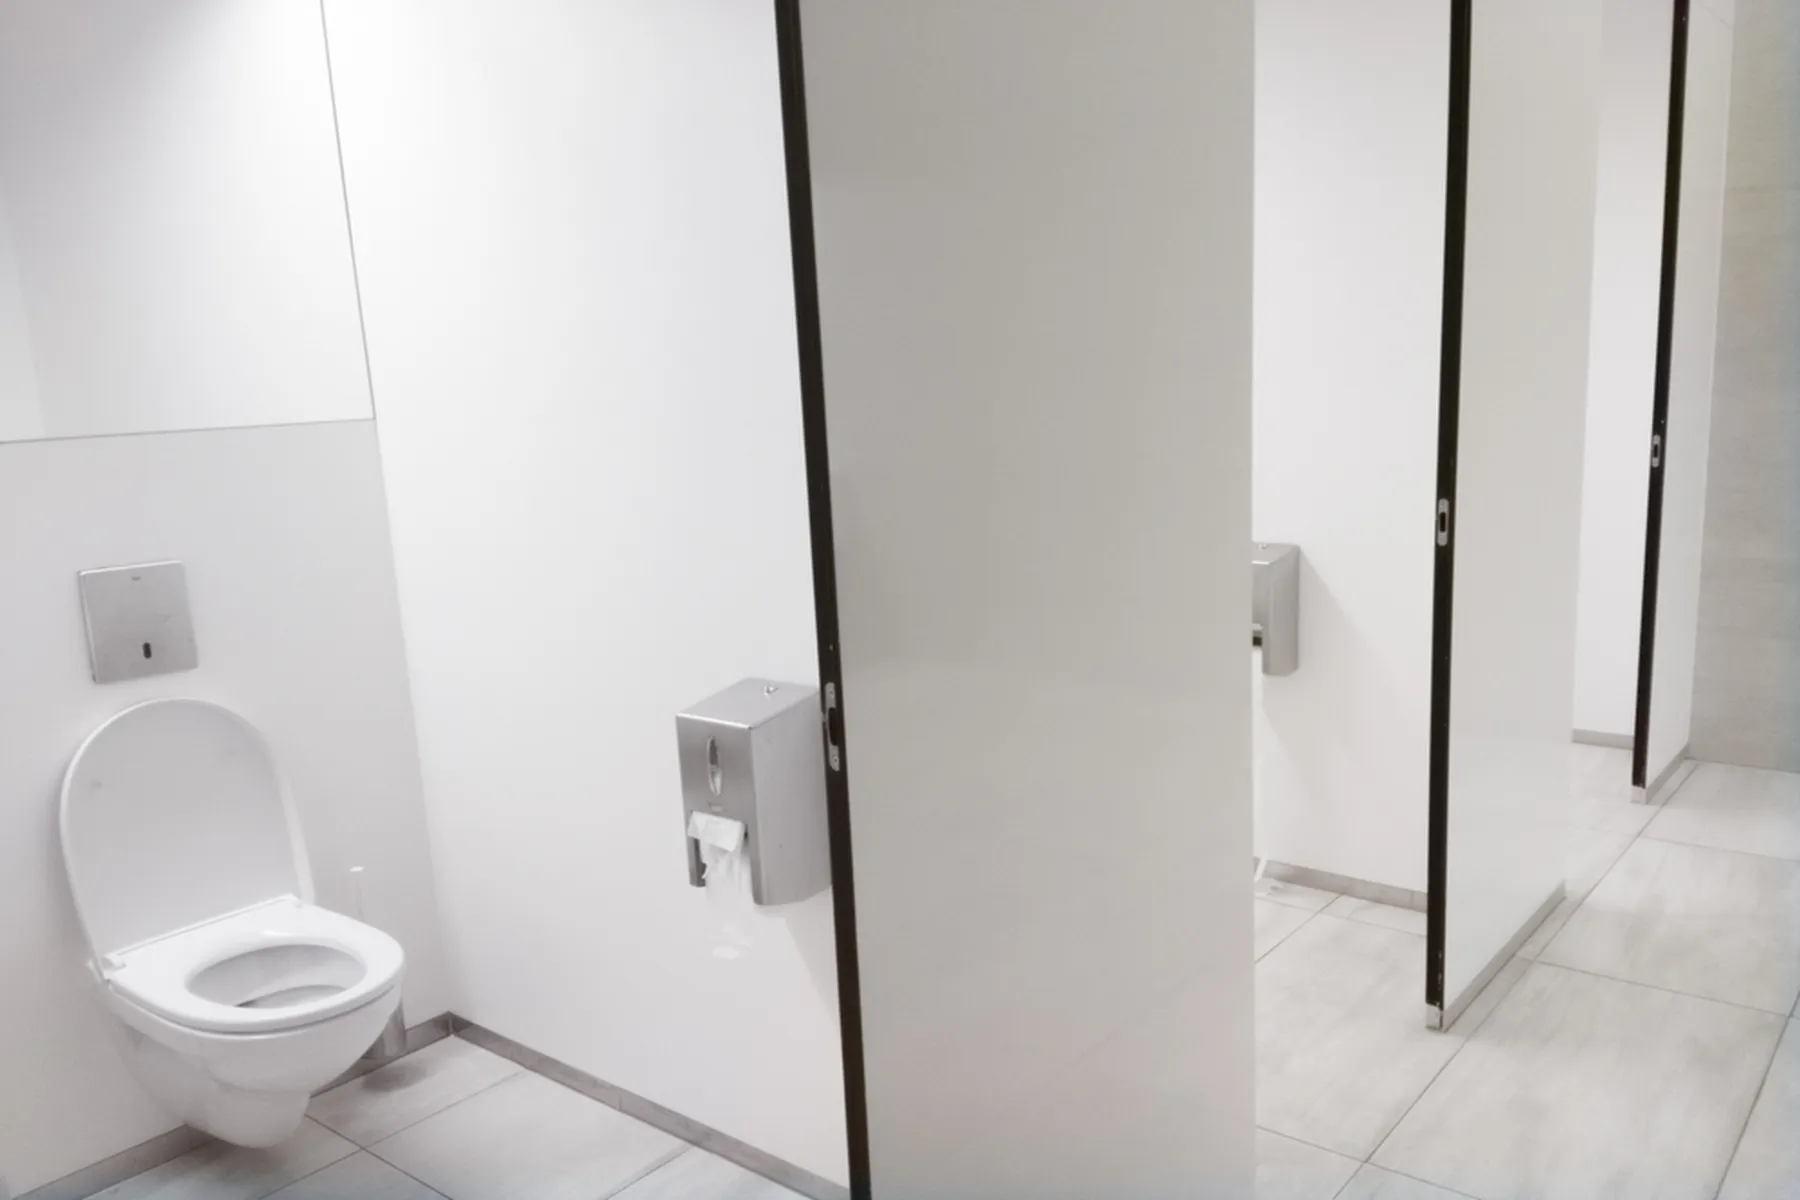 A white bathroom stall with a toilet.